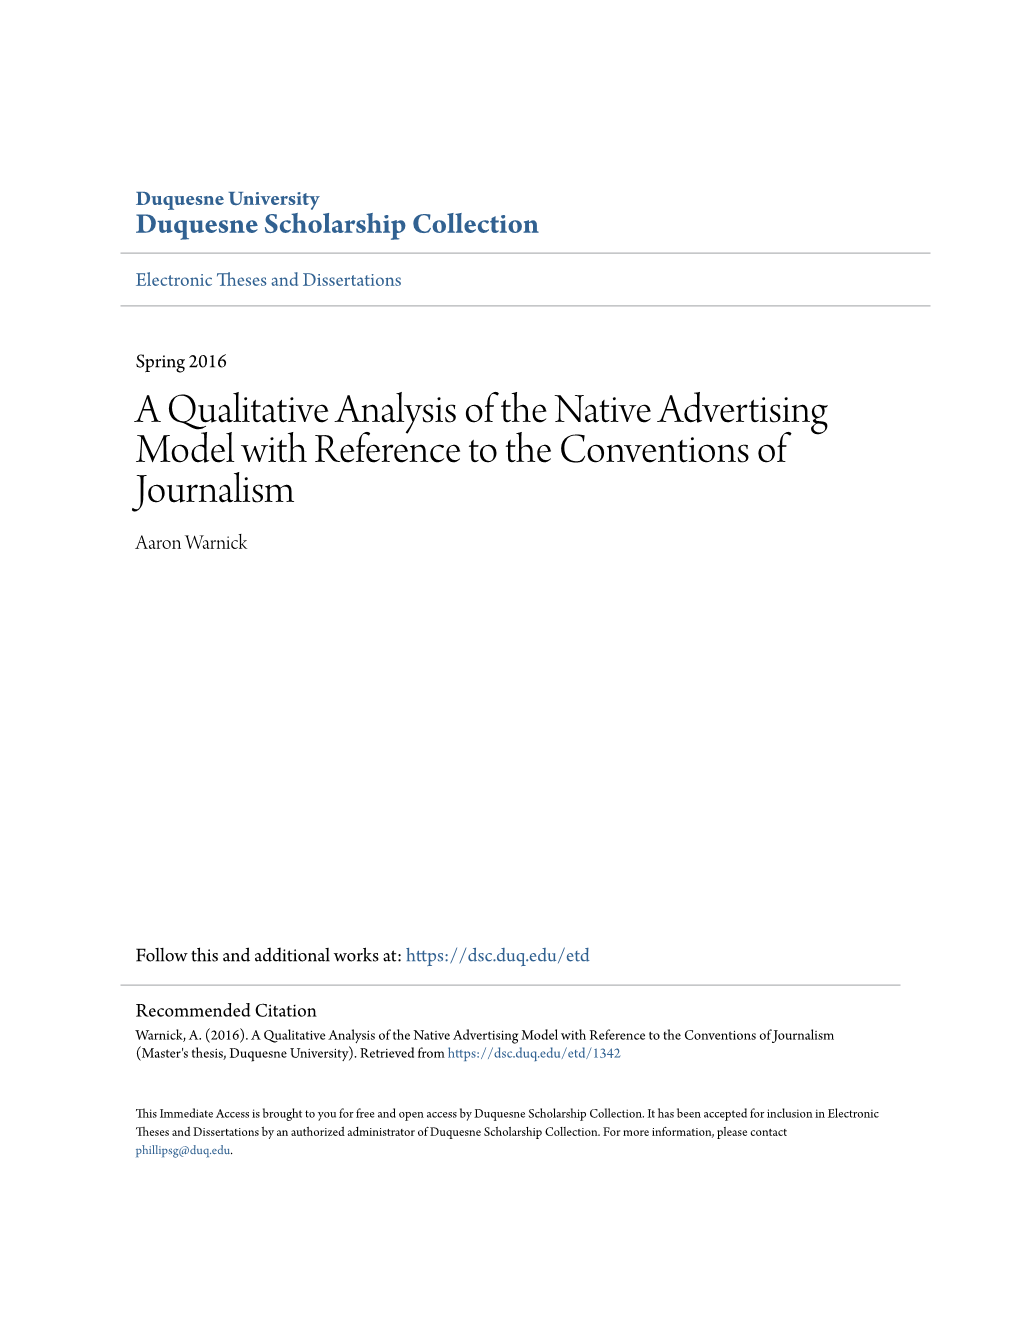 A Qualitative Analysis of the Native Advertising Model with Reference to the Conventions of Journalism Aaron Warnick